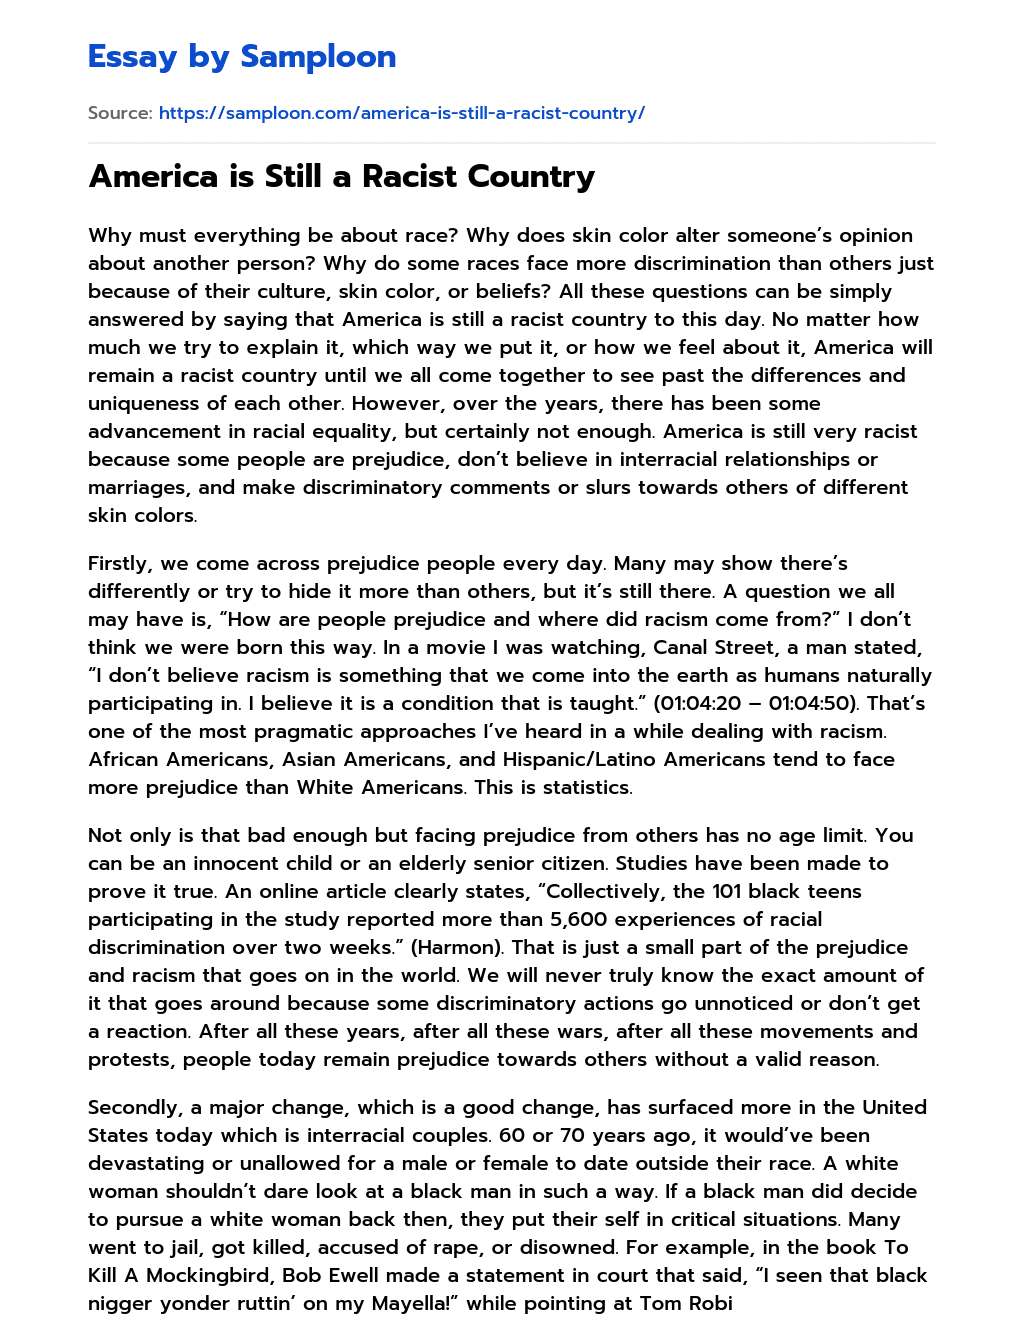 America is Still a Racist Country essay